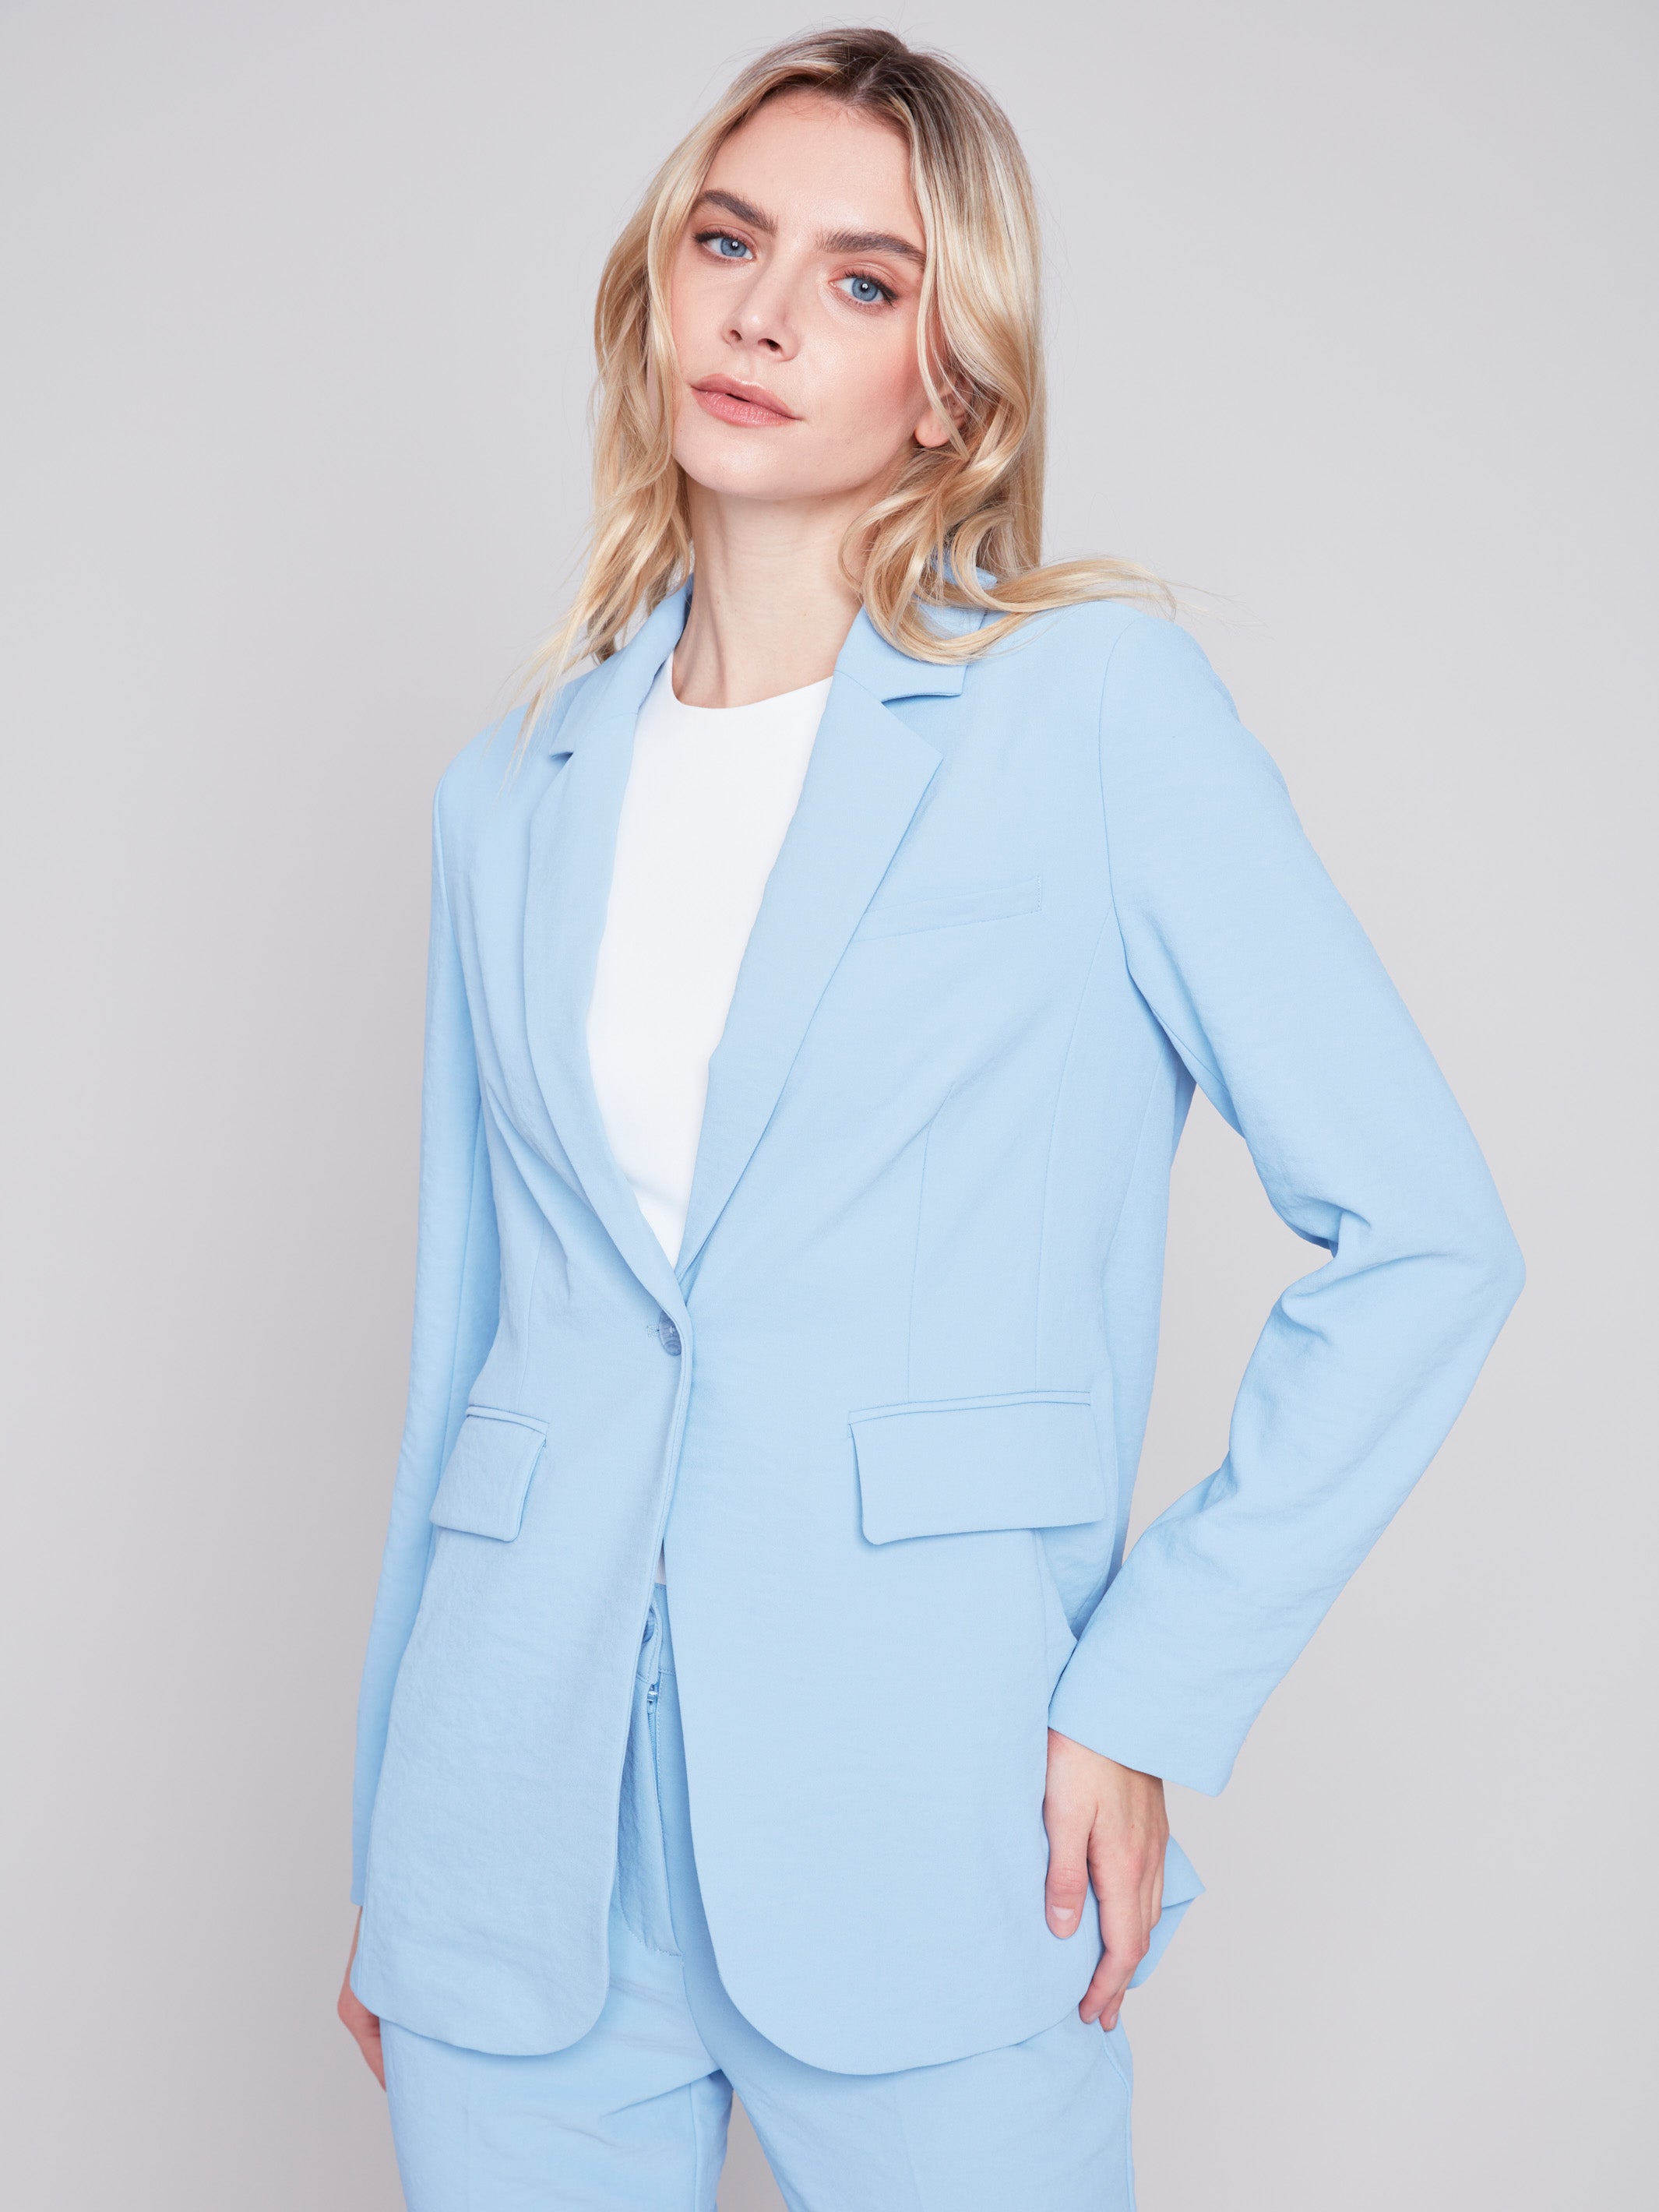 Charlie B Blazer with Ruched Back - Sky - Image 1